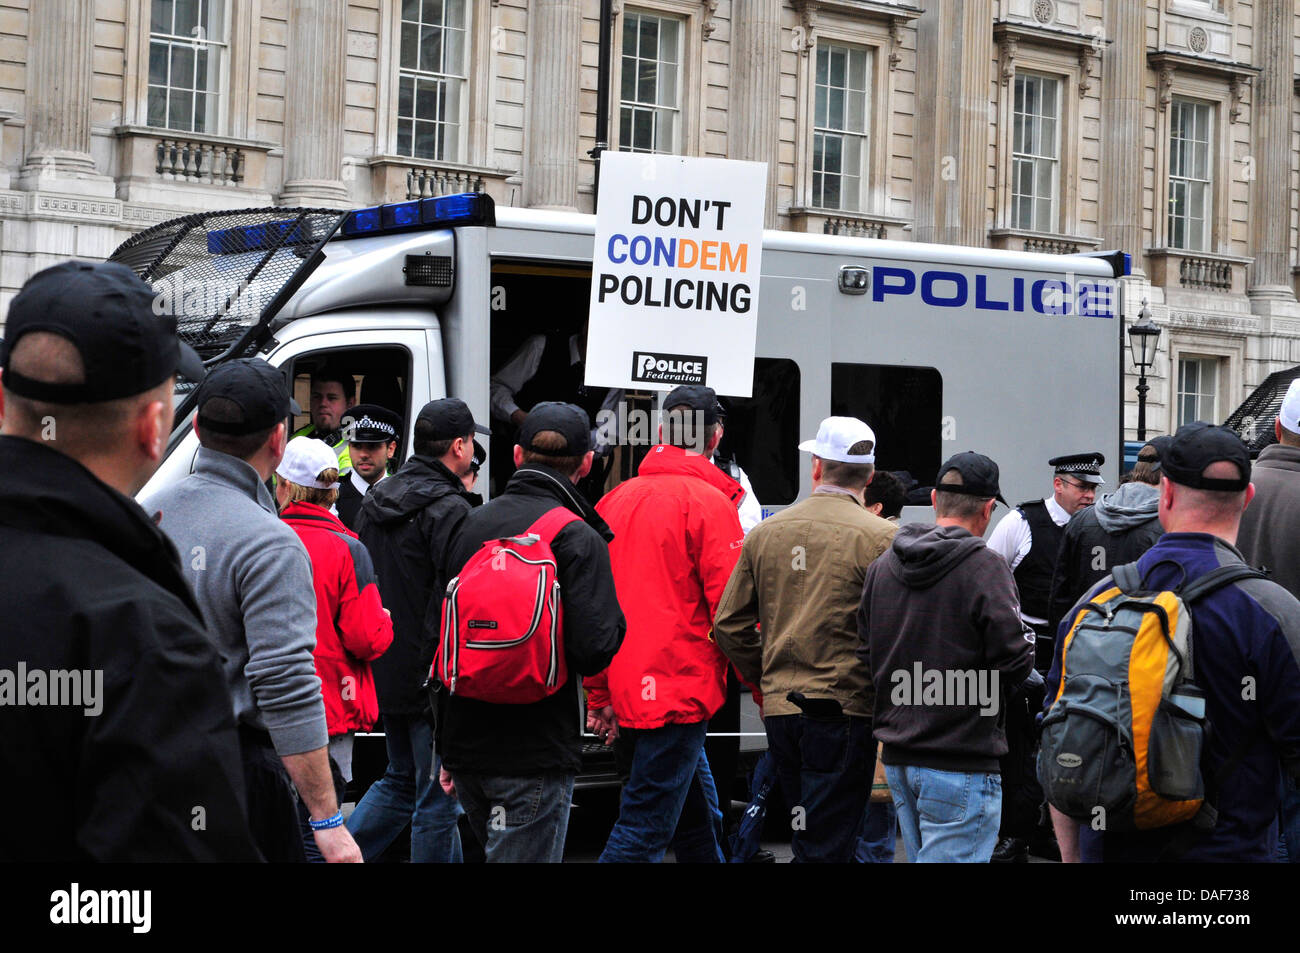 Off-duty police officers walk past a police van in Whitehall, London, UK Stock Photo